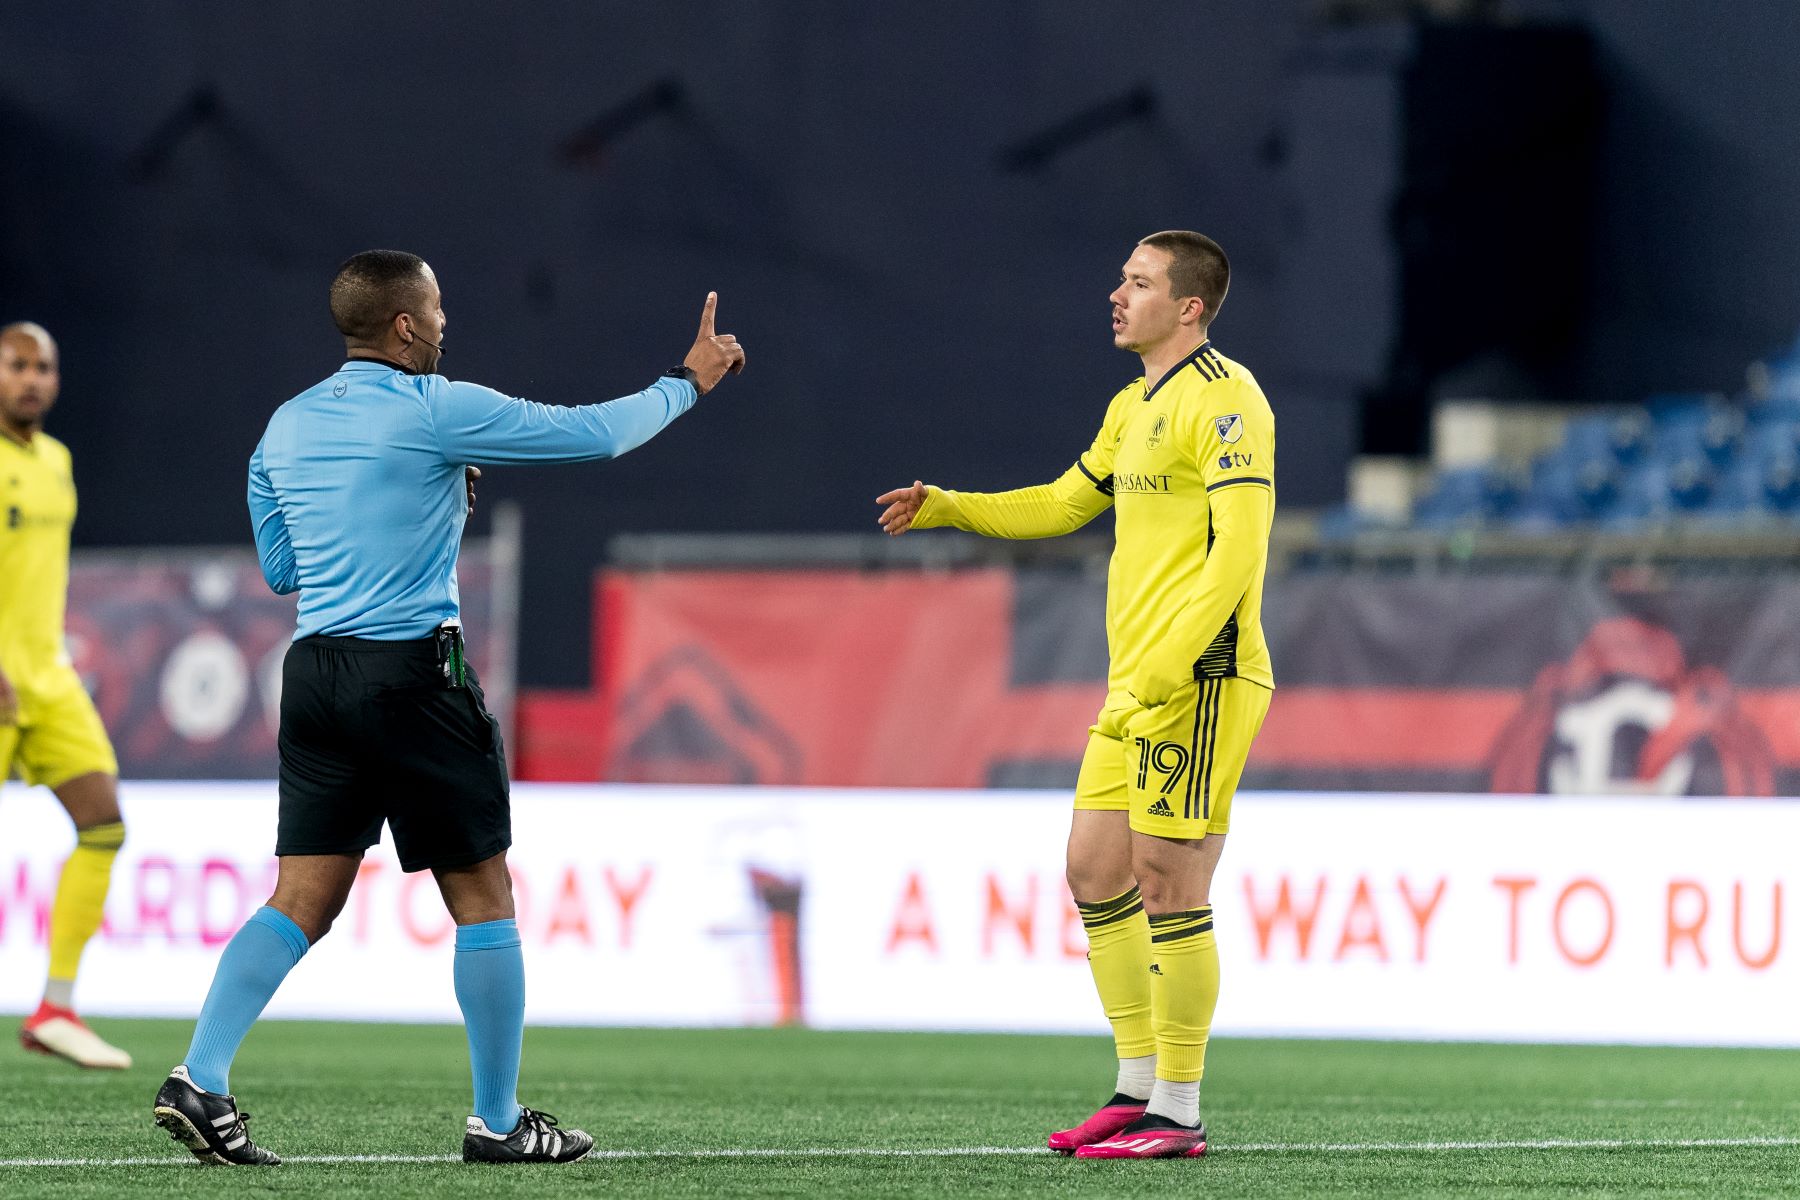 Open Cup Final Assignment is Milestone on Jon Freemons Referee Journey U.S